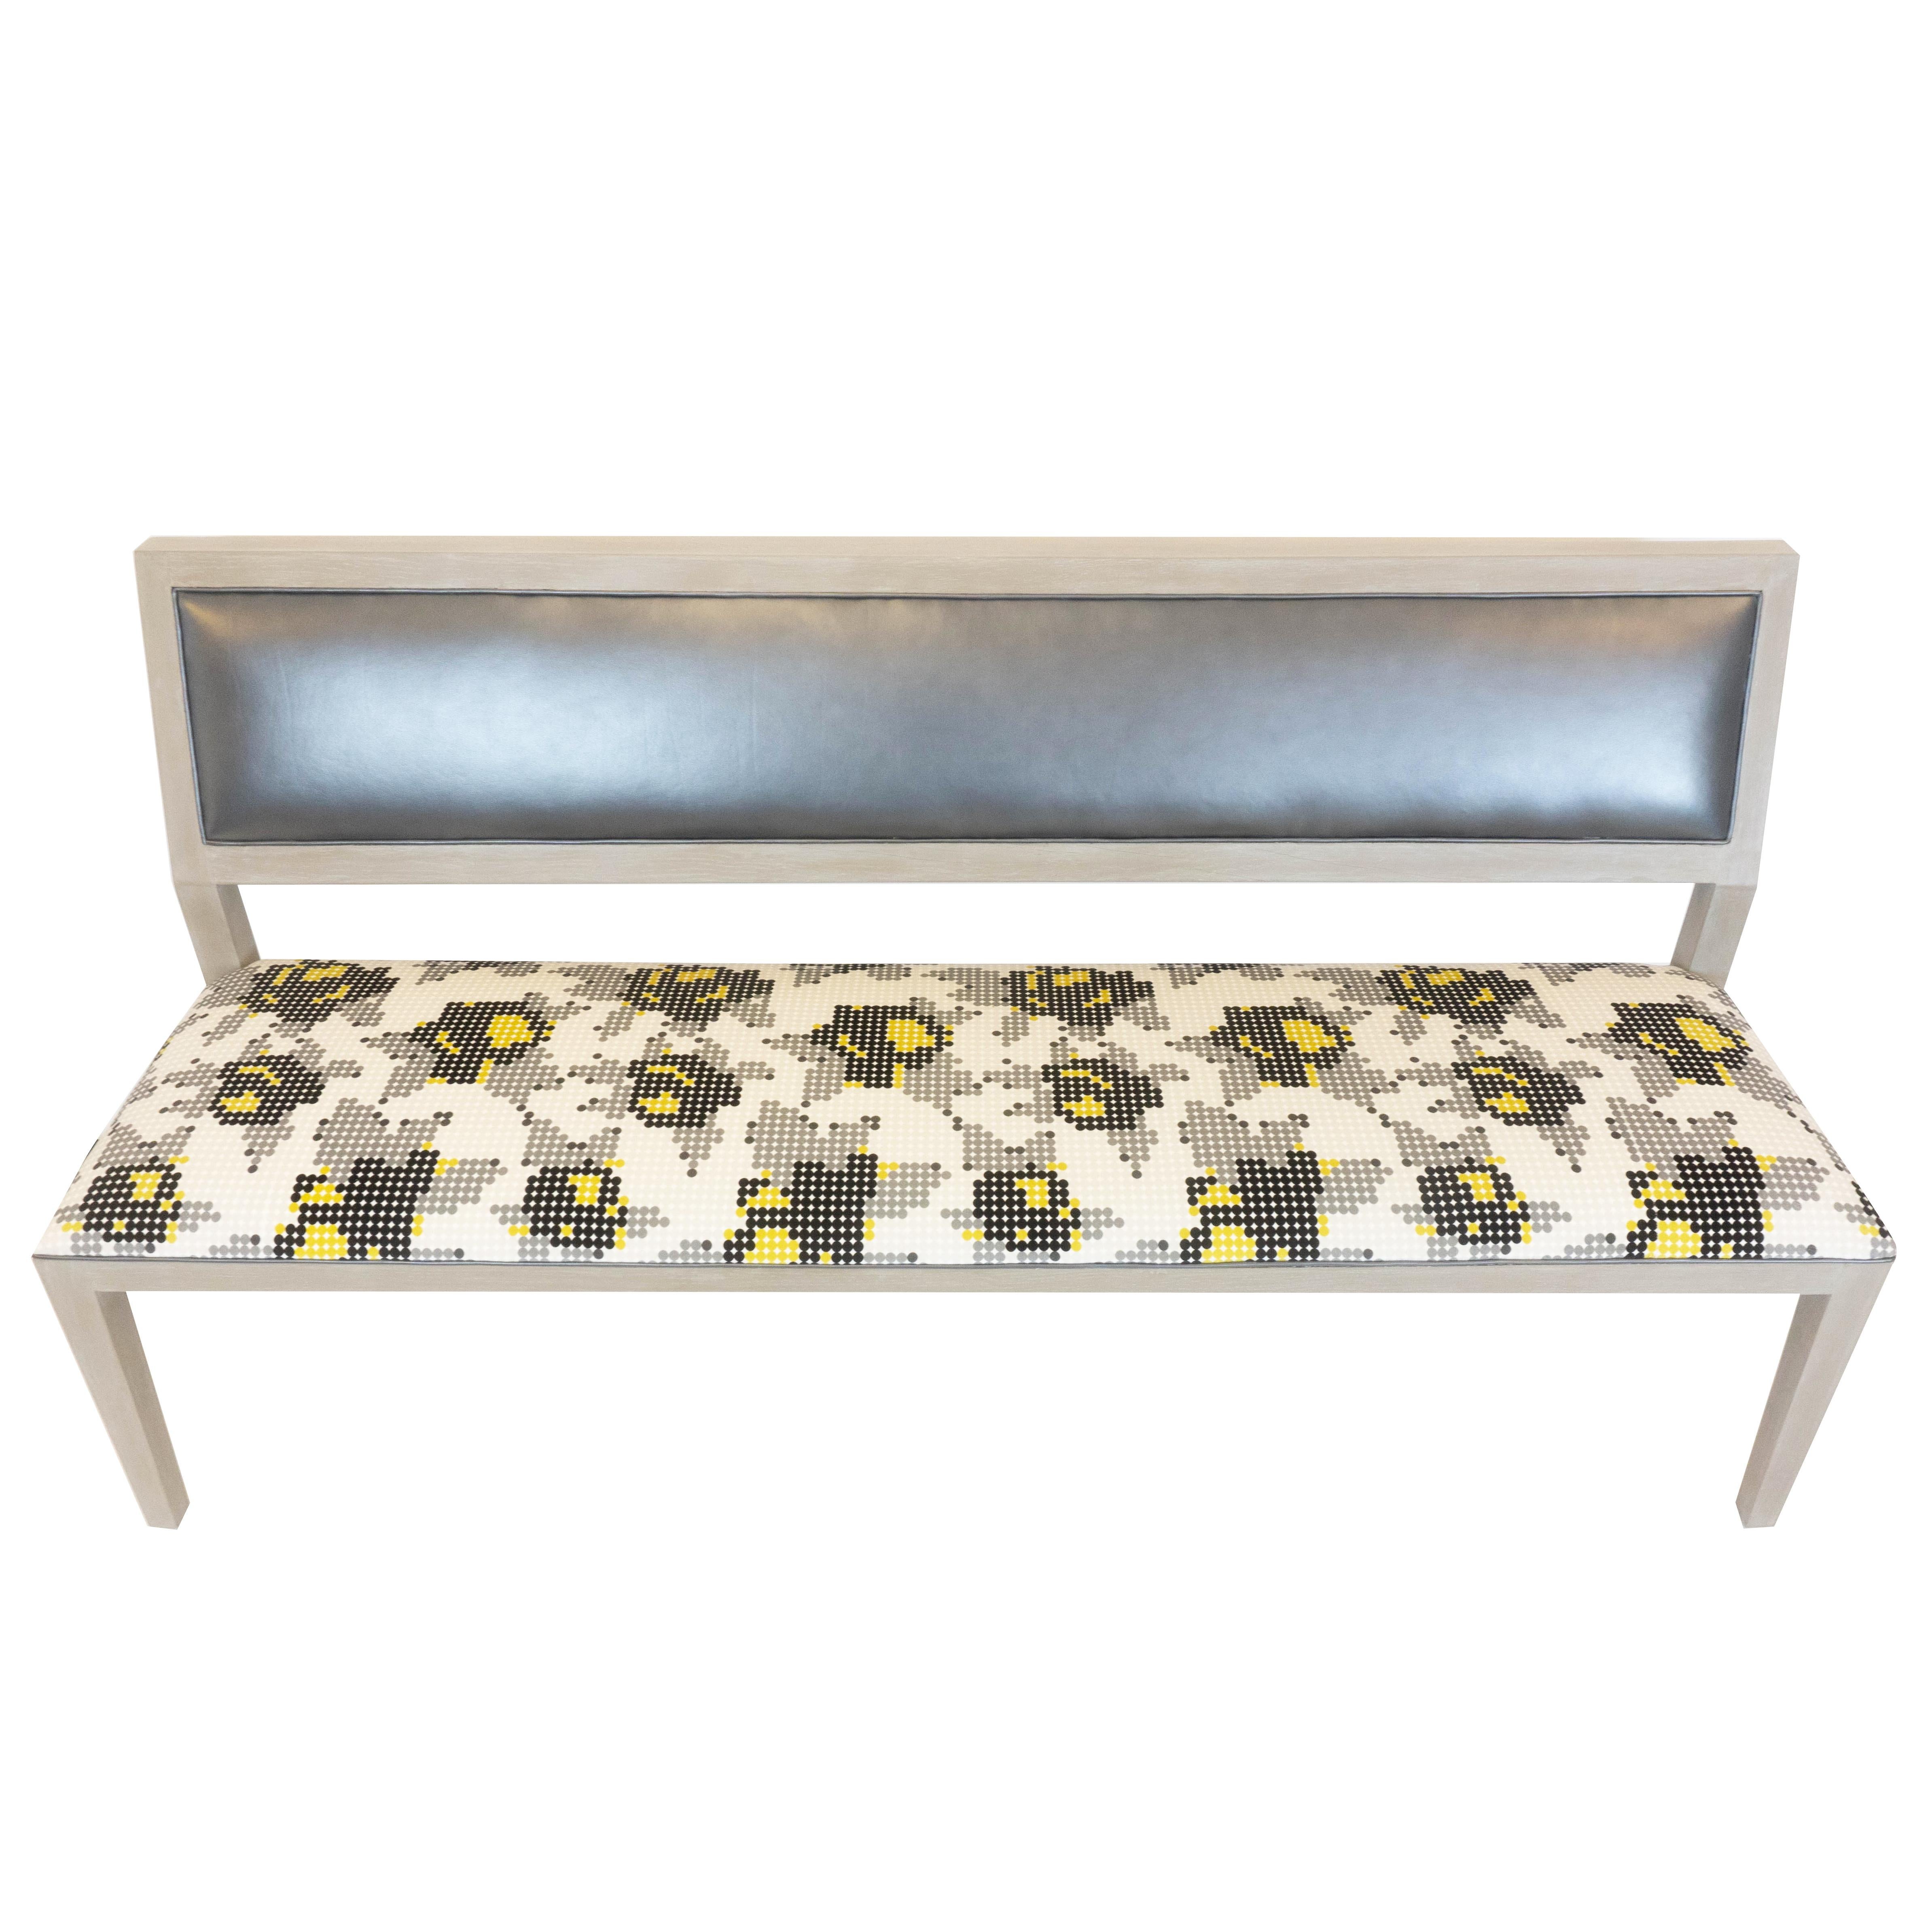 Our built to order bench is completely customizable. The bench shown has a cushioned back that is upholstered and welted with a grey vinyl material, the padded seat is upholstered in a pixel-like floral print, and the exposed wood is done in a